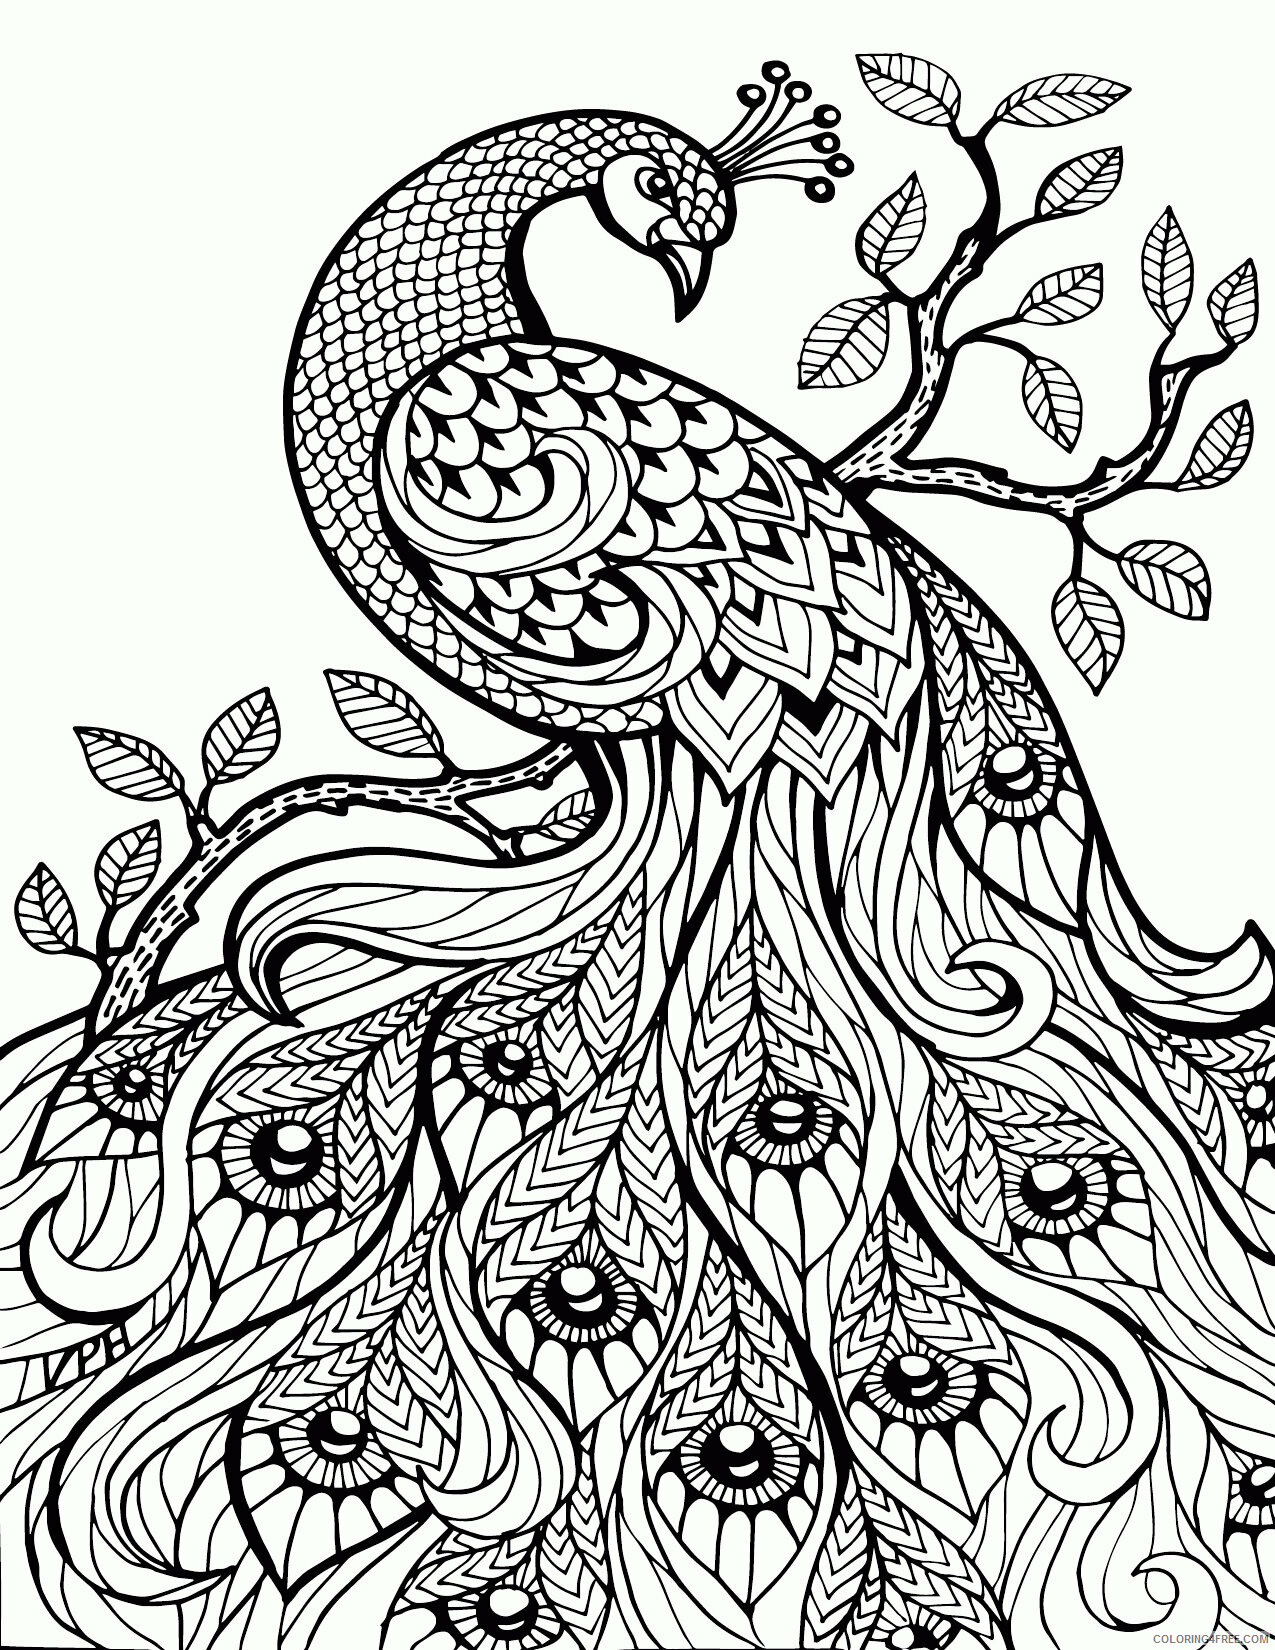 Adult Coloring Pages To Print Printable Sheets Adult Free jpg 2021 a 2147 Coloring4free